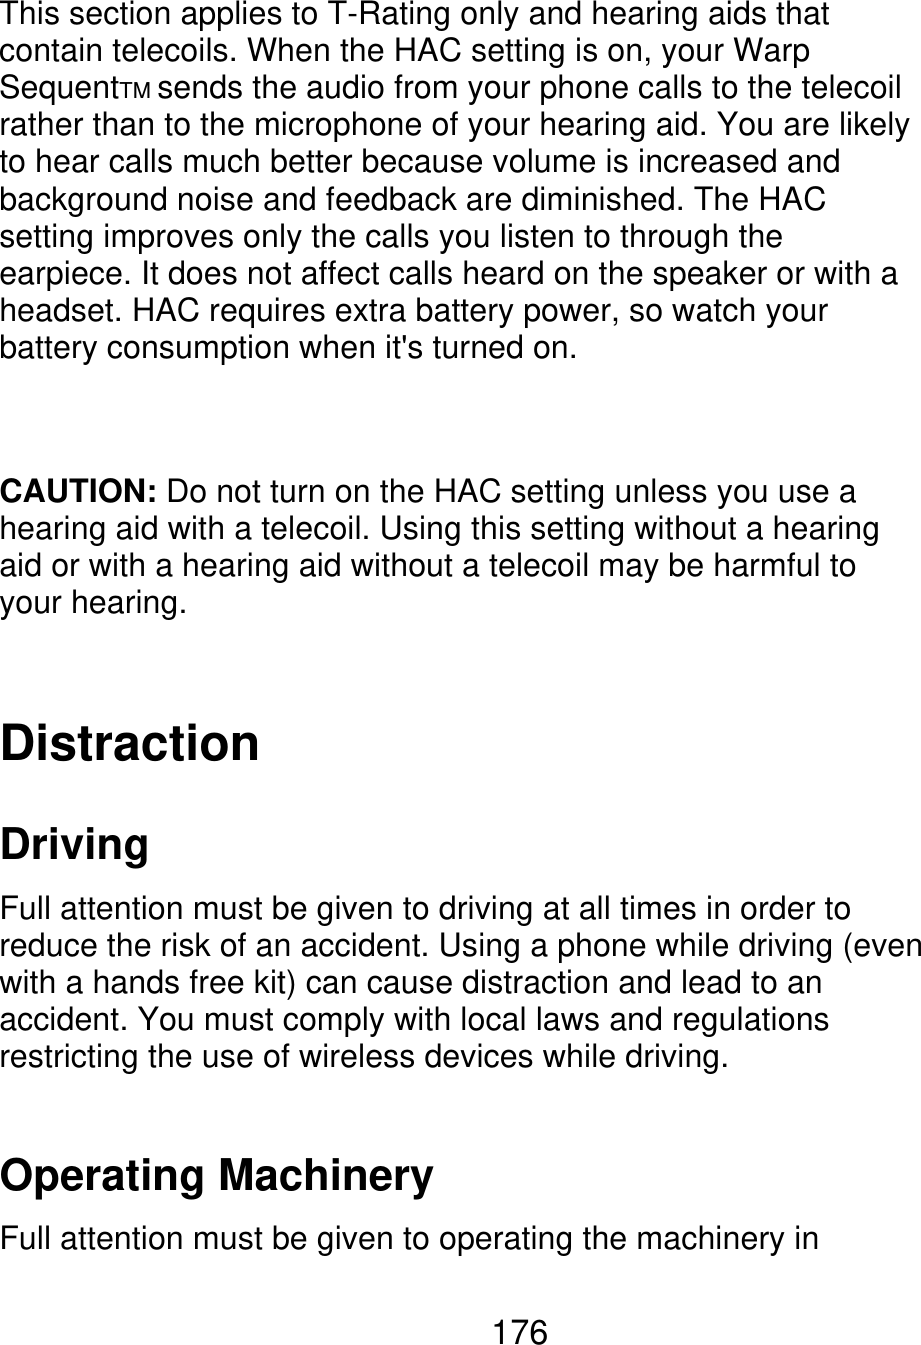 This section applies to T-Rating only and hearing aids that contain telecoils. When the HAC setting is on, your Warp SequentTM sends the audio from your phone calls to the telecoil rather than to the microphone of your hearing aid. You are likely to hear calls much better because volume is increased and background noise and feedback are diminished. The HAC setting improves only the calls you listen to through the earpiece. It does not affect calls heard on the speaker or with a headset. HAC requires extra battery power, so watch your battery consumption when it&apos;s turned on. CAUTION: Do not turn on the HAC setting unless you use a hearing aid with a telecoil. Using this setting without a hearing aid or with a hearing aid without a telecoil may be harmful to your hearing. Distraction Driving Full attention must be given to driving at all times in order to reduce the risk of an accident. Using a phone while driving (even with a hands free kit) can cause distraction and lead to an accident. You must comply with local laws and regulations restricting the use of wireless devices while driving. Operating Machinery Full attention must be given to operating the machinery in 176 